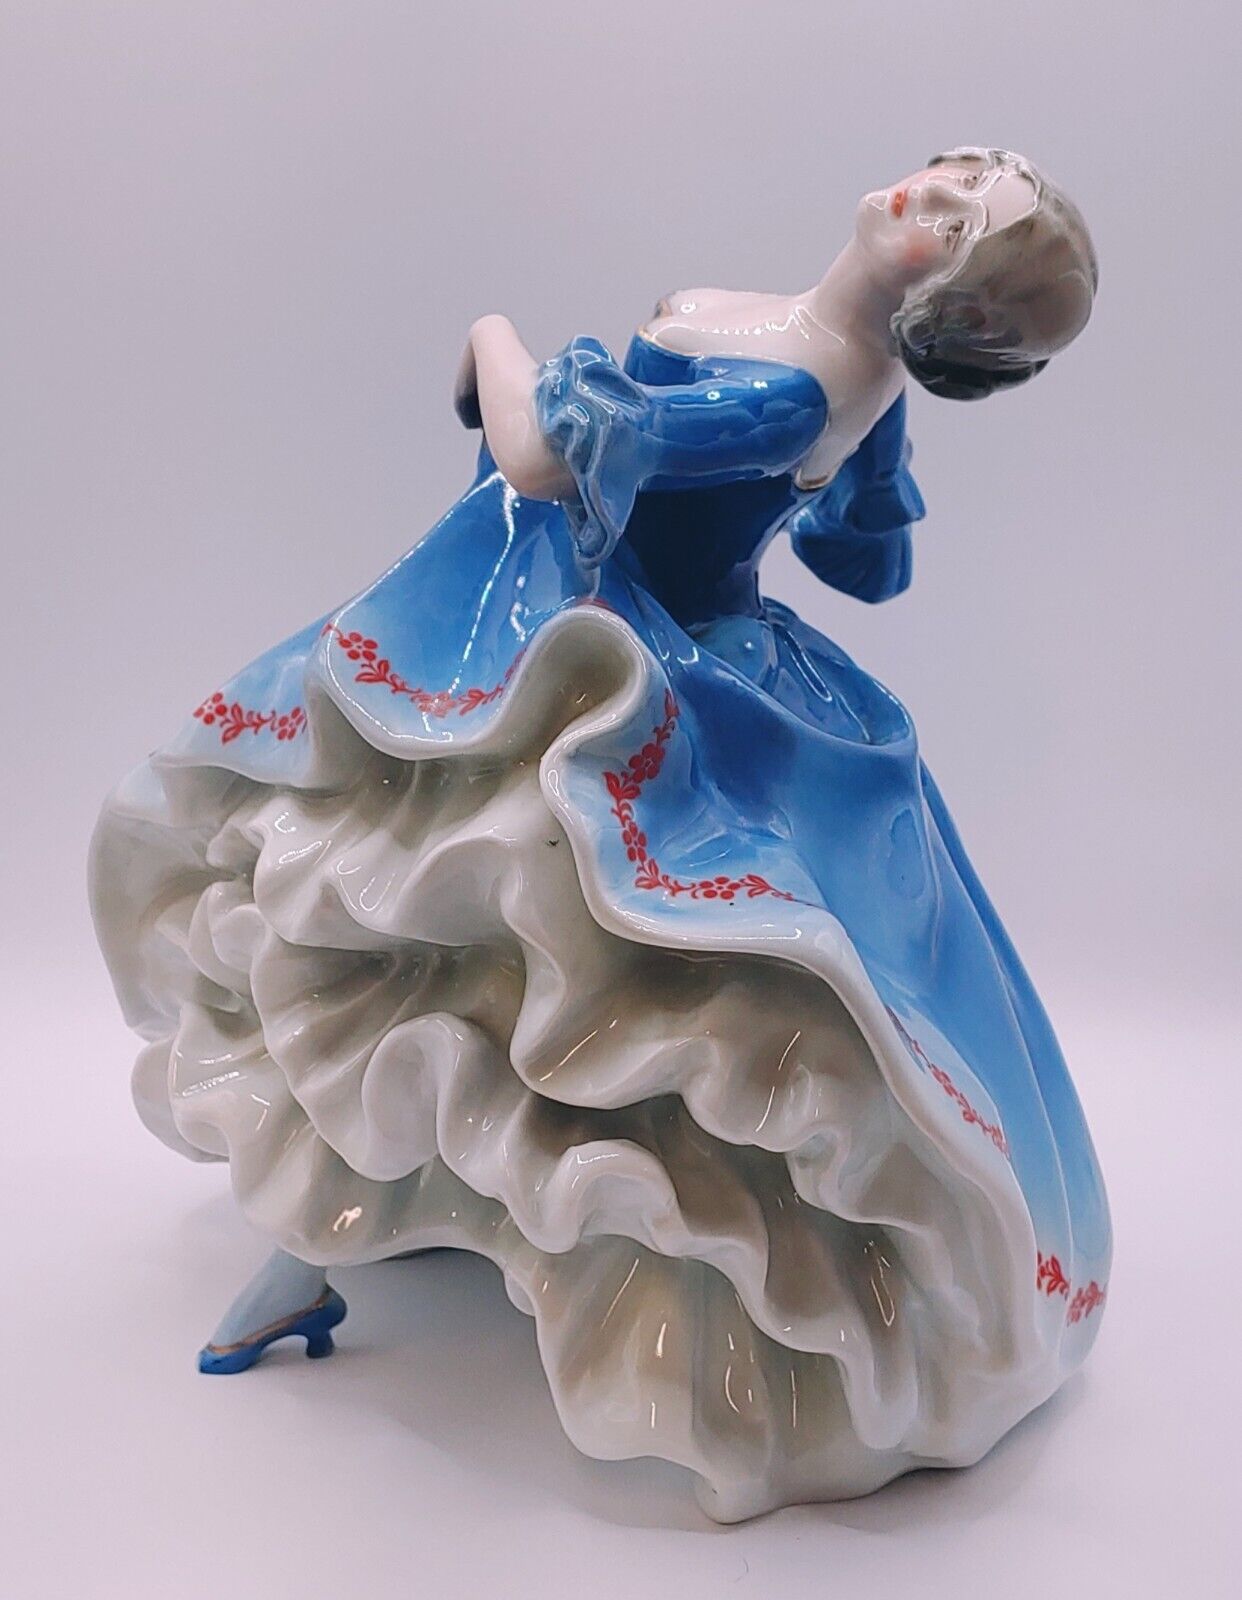 Antique Rosenthal Germany Hand Painted Porcelain Figurine Rococo Dancer